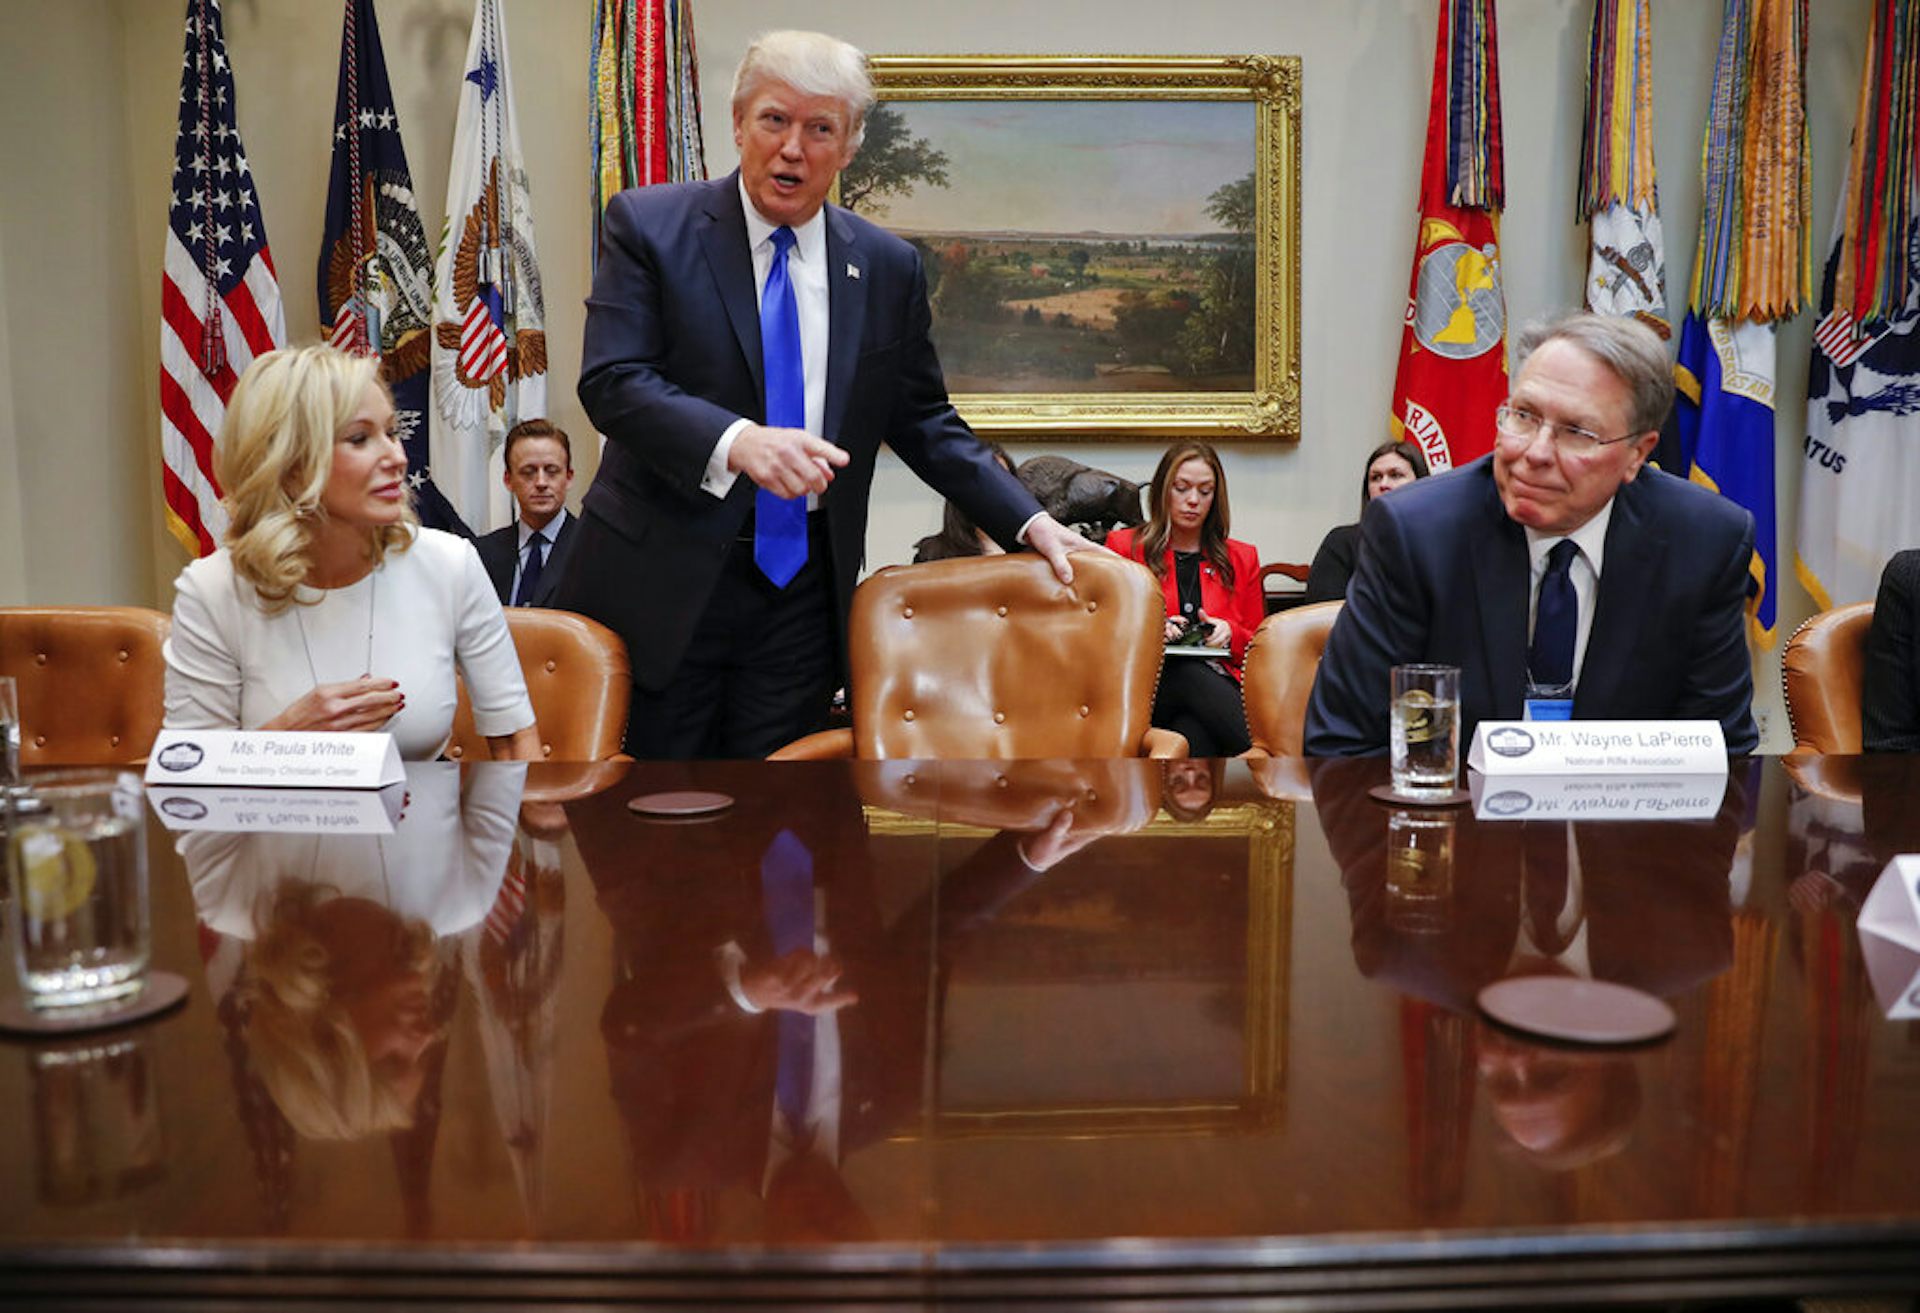 President Donald Trump takes his seat next to National Rifle Associations (NRA) Executive Vice President and Chief Executive Officer Wayne LaPierre, right, and Pastor Paula White, left, of the New Destiny Christian Center, at a 2017 White House meeting.